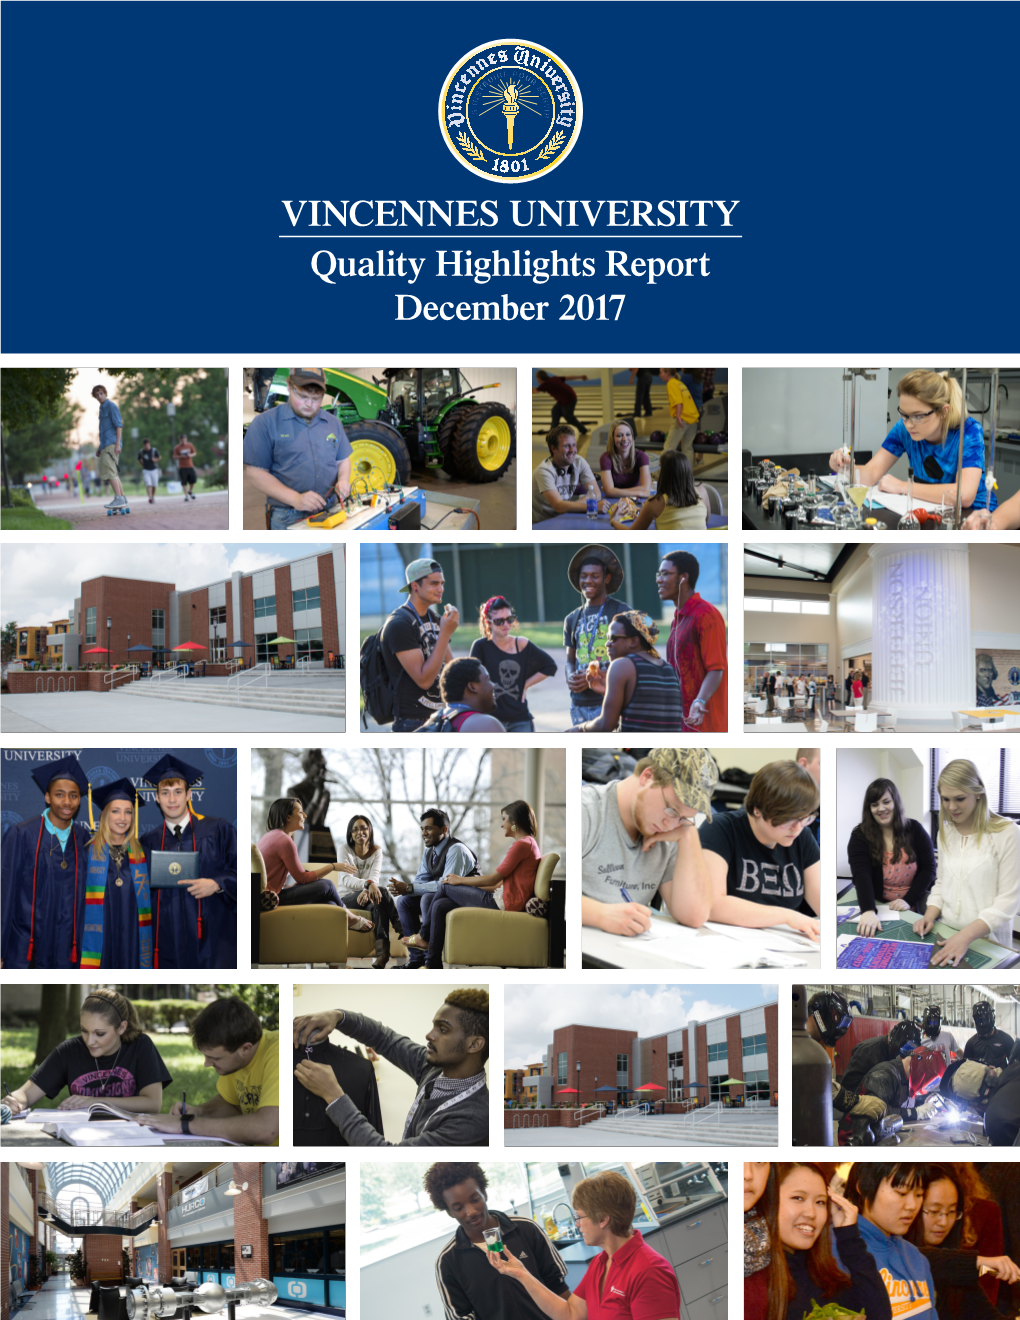 VINCENNES UNIVERSITY Quality Highlights Report December 2017 Quality Highlights Report